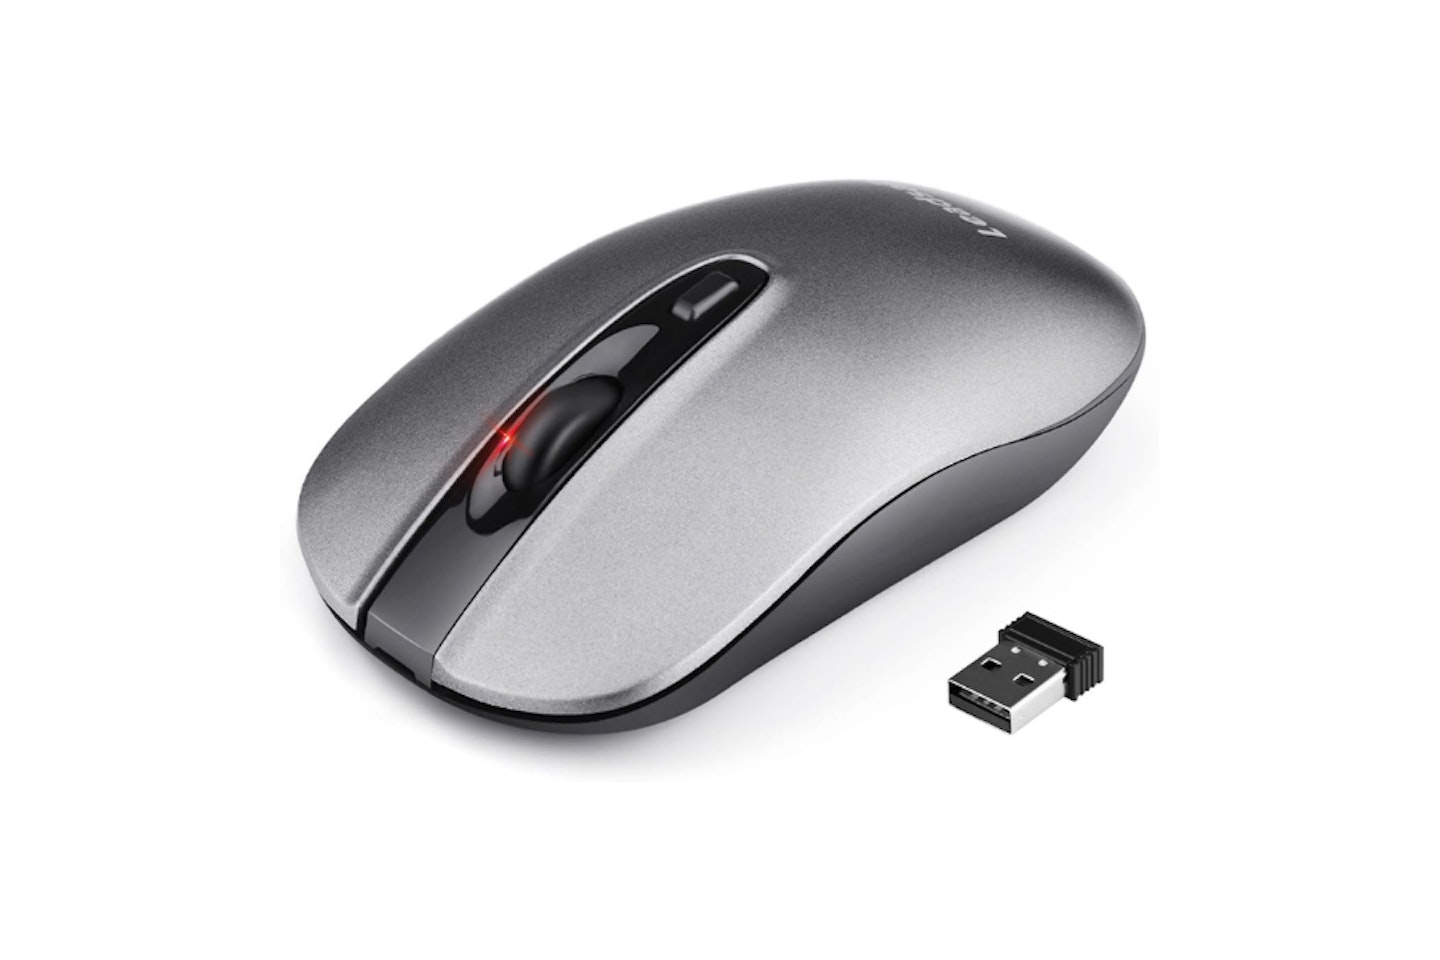 LeadsaiL Wireless Silent Mouse